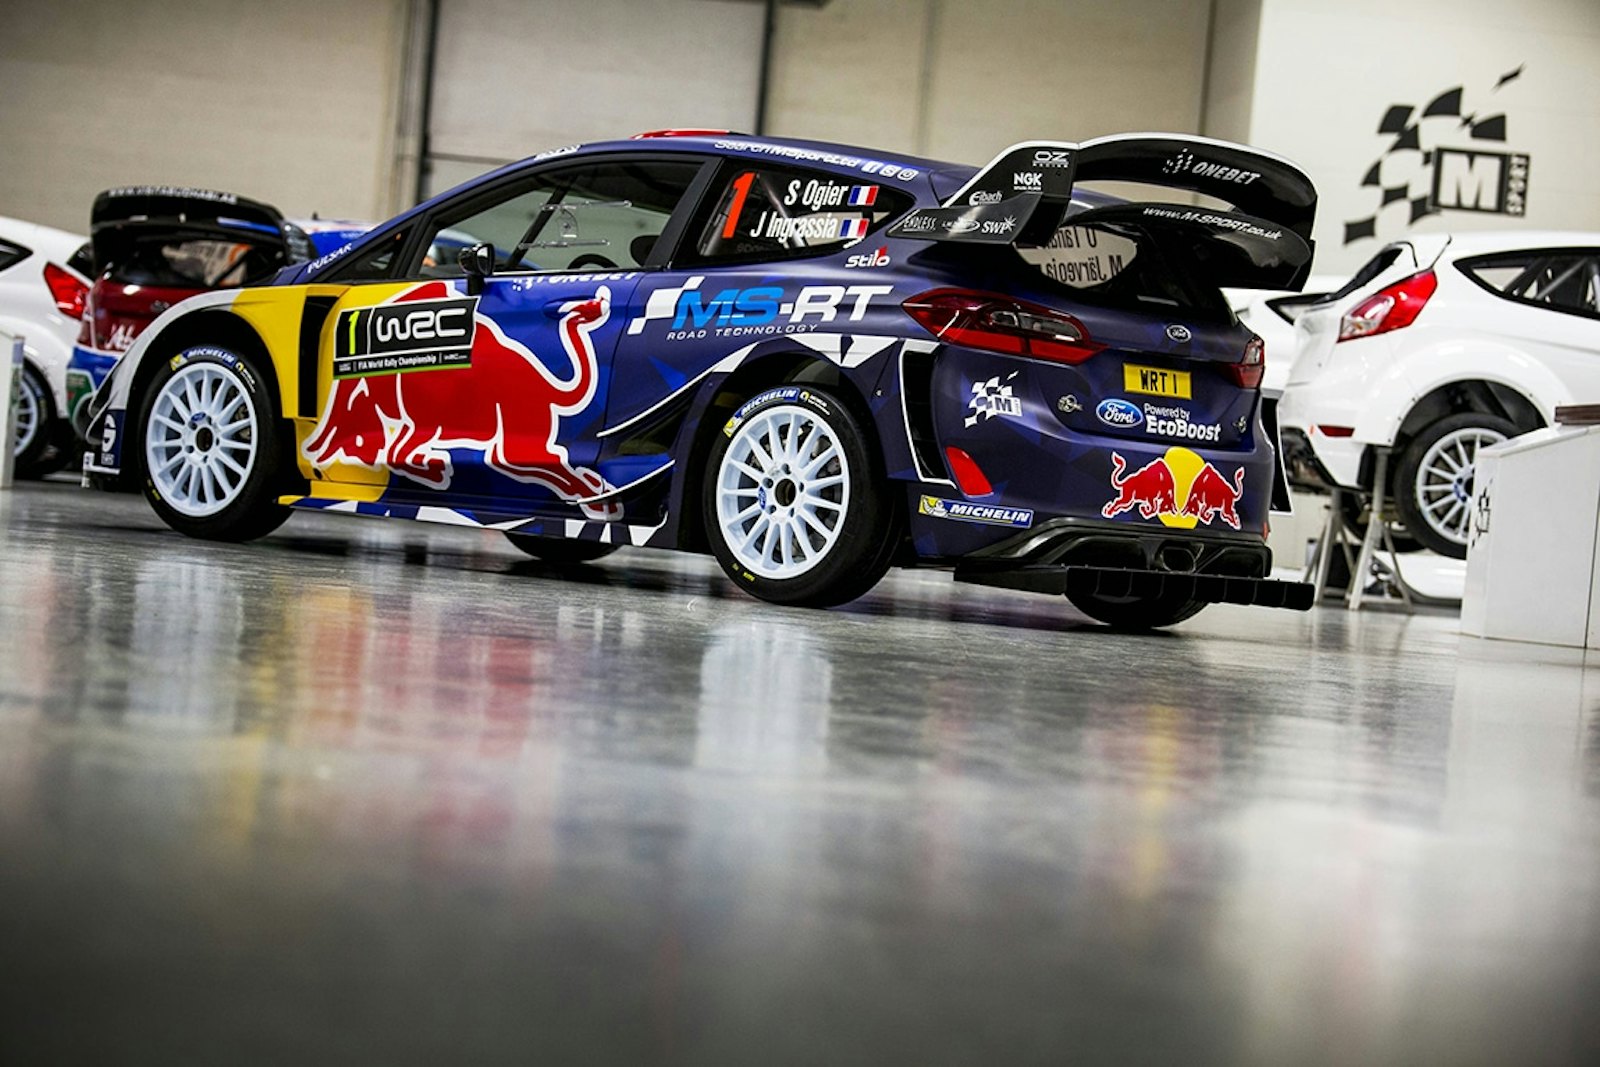 M-Sport reveal the new livery for their 2017 EcoBoost-powered Ford Fiesta which will be driven by four-time World Rally Champion Sebastien Ogier. // M-Sport/Red Bull Content Pool // P-20161223-00952 // Usage for editorial use only // Please go to www.redbullcontentpool.com for further information. //